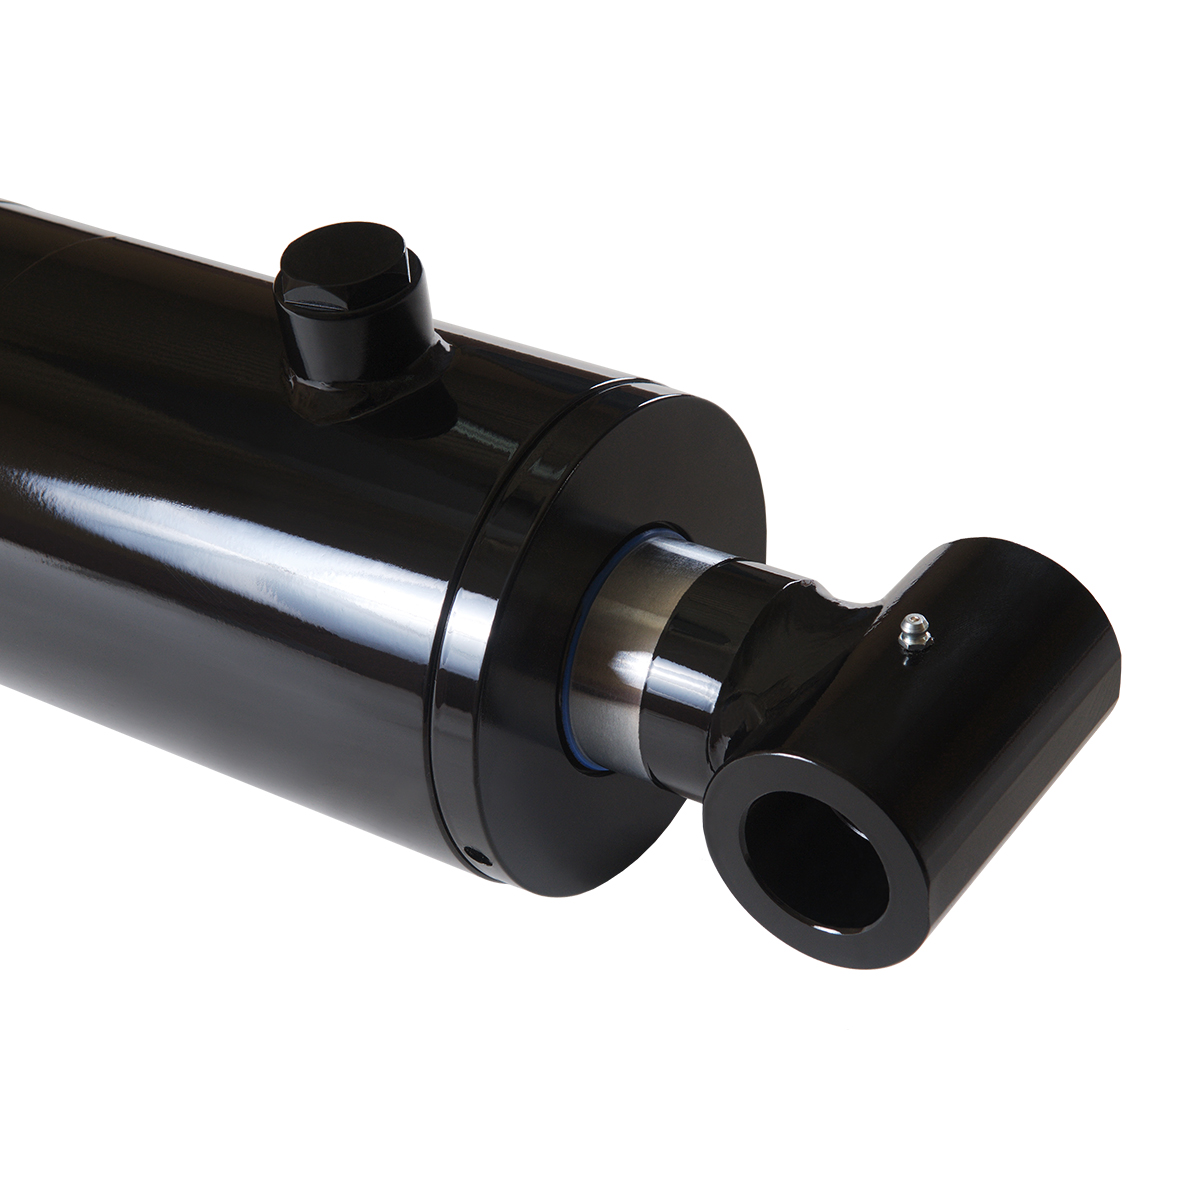 6 bore x 24 stroke hydraulic cylinder, welded cross tube double acting cylinder | Magister Hydraulics